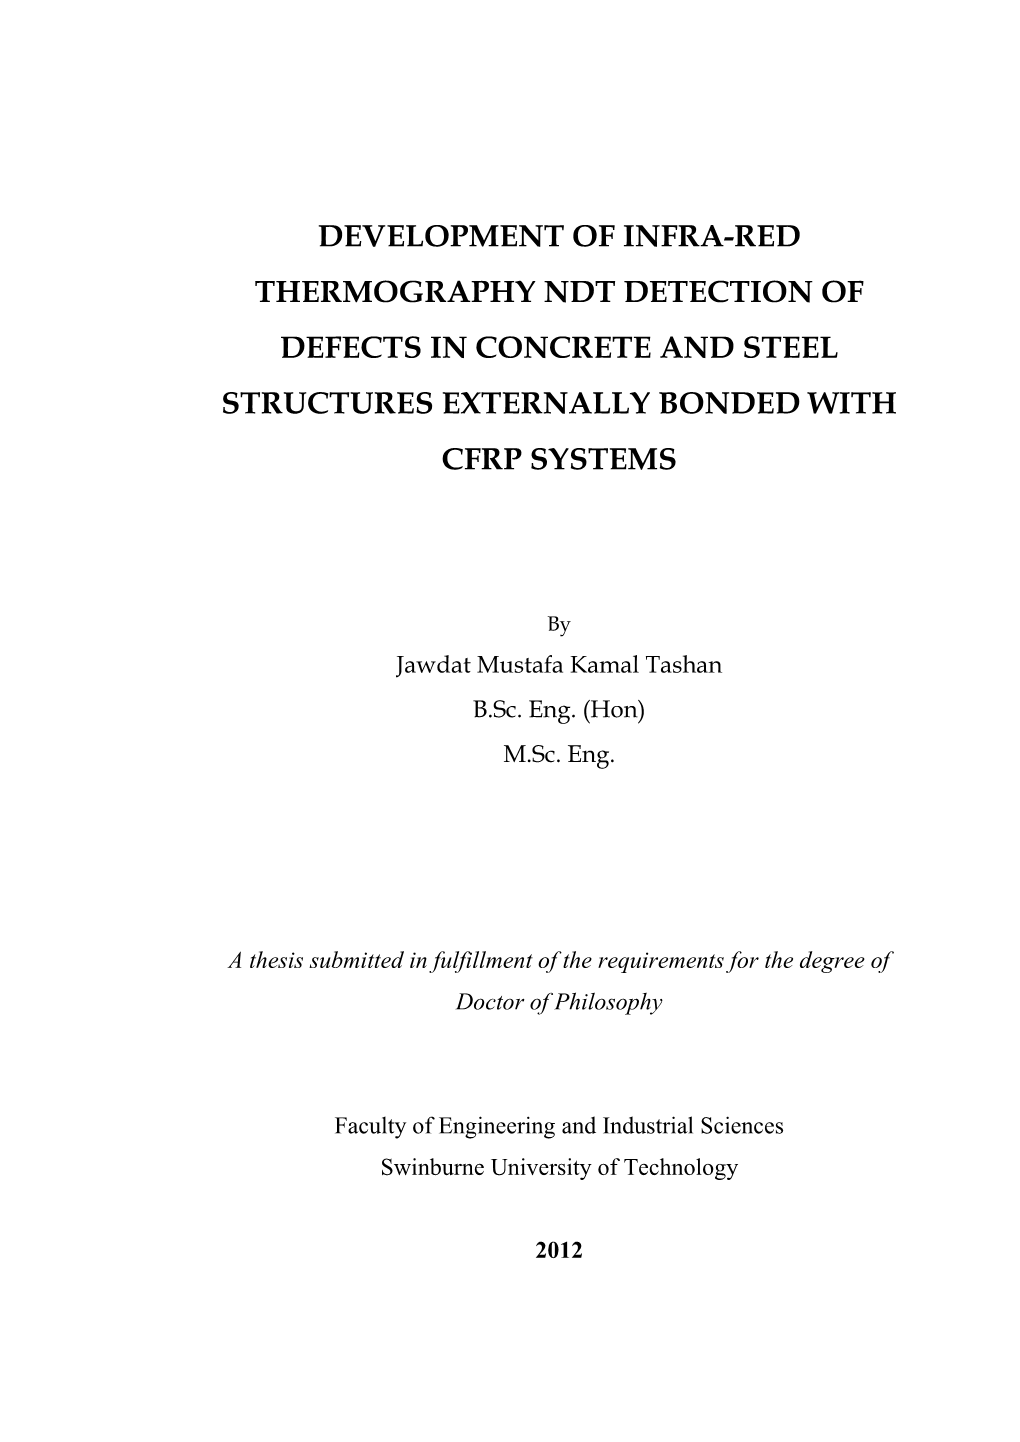 Development of Infra-Red Thermography Ndt Detection of Defects in Concrete and Steel Structures Externally Bonded with Cfrp Systems